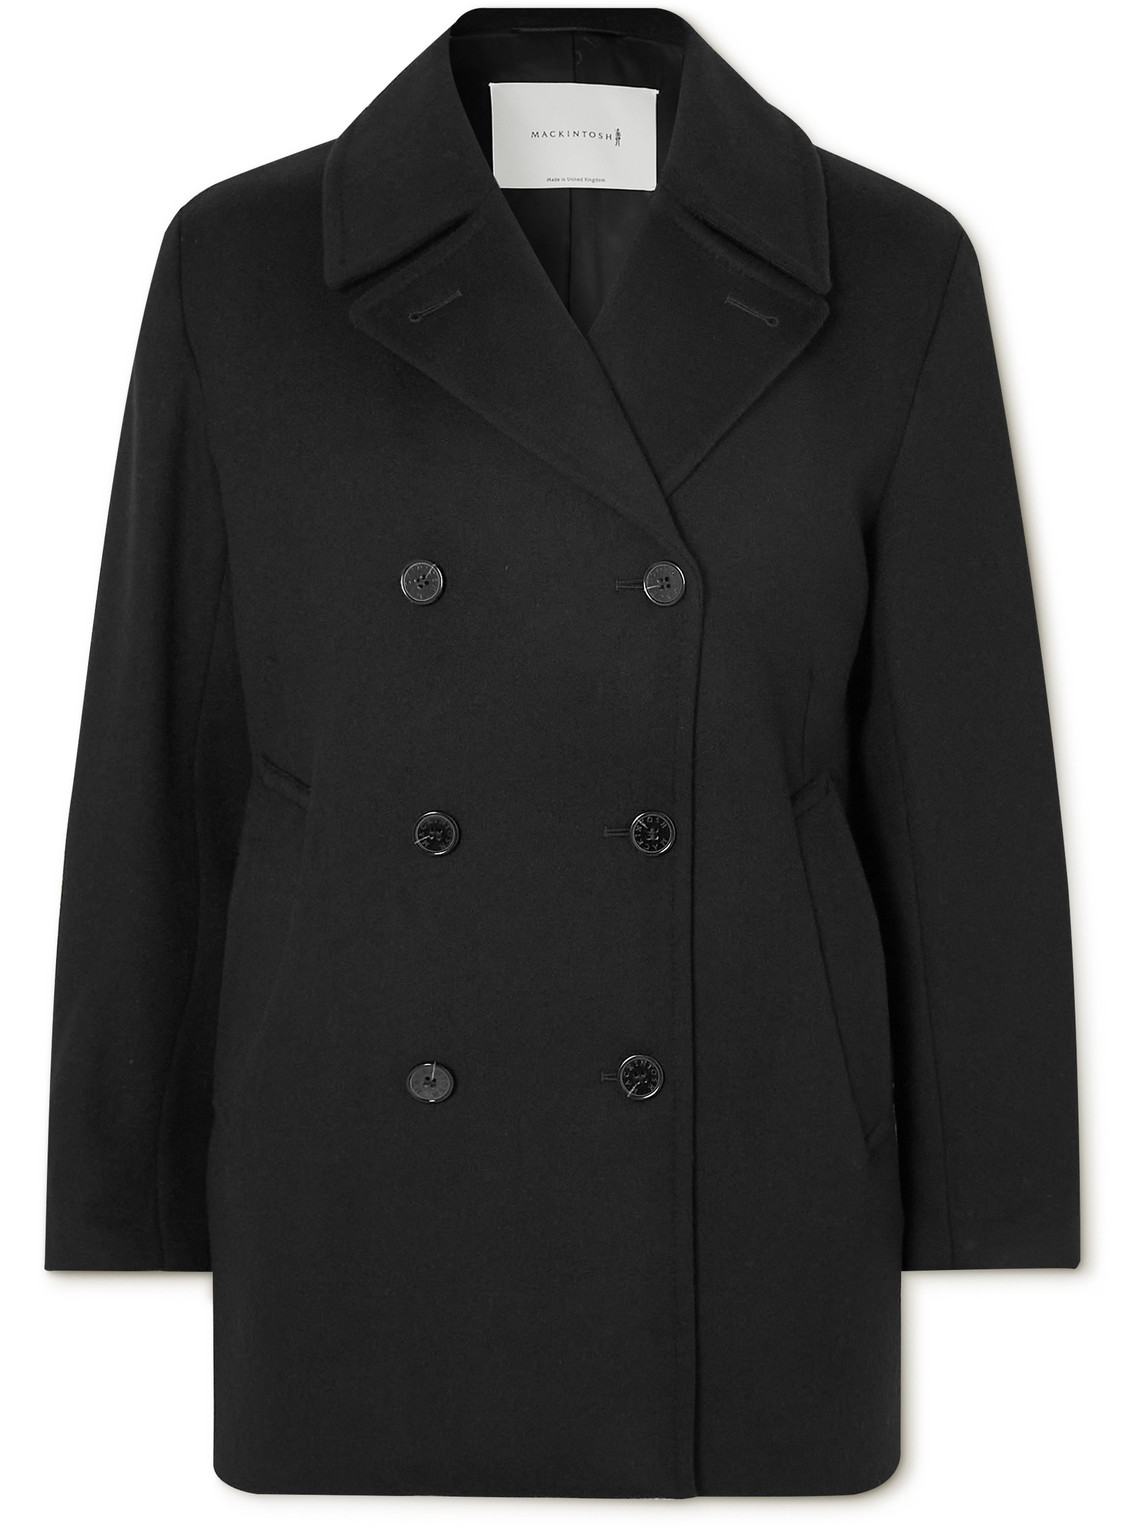 Dalton Wool and Cashmere-Blend Peacoat